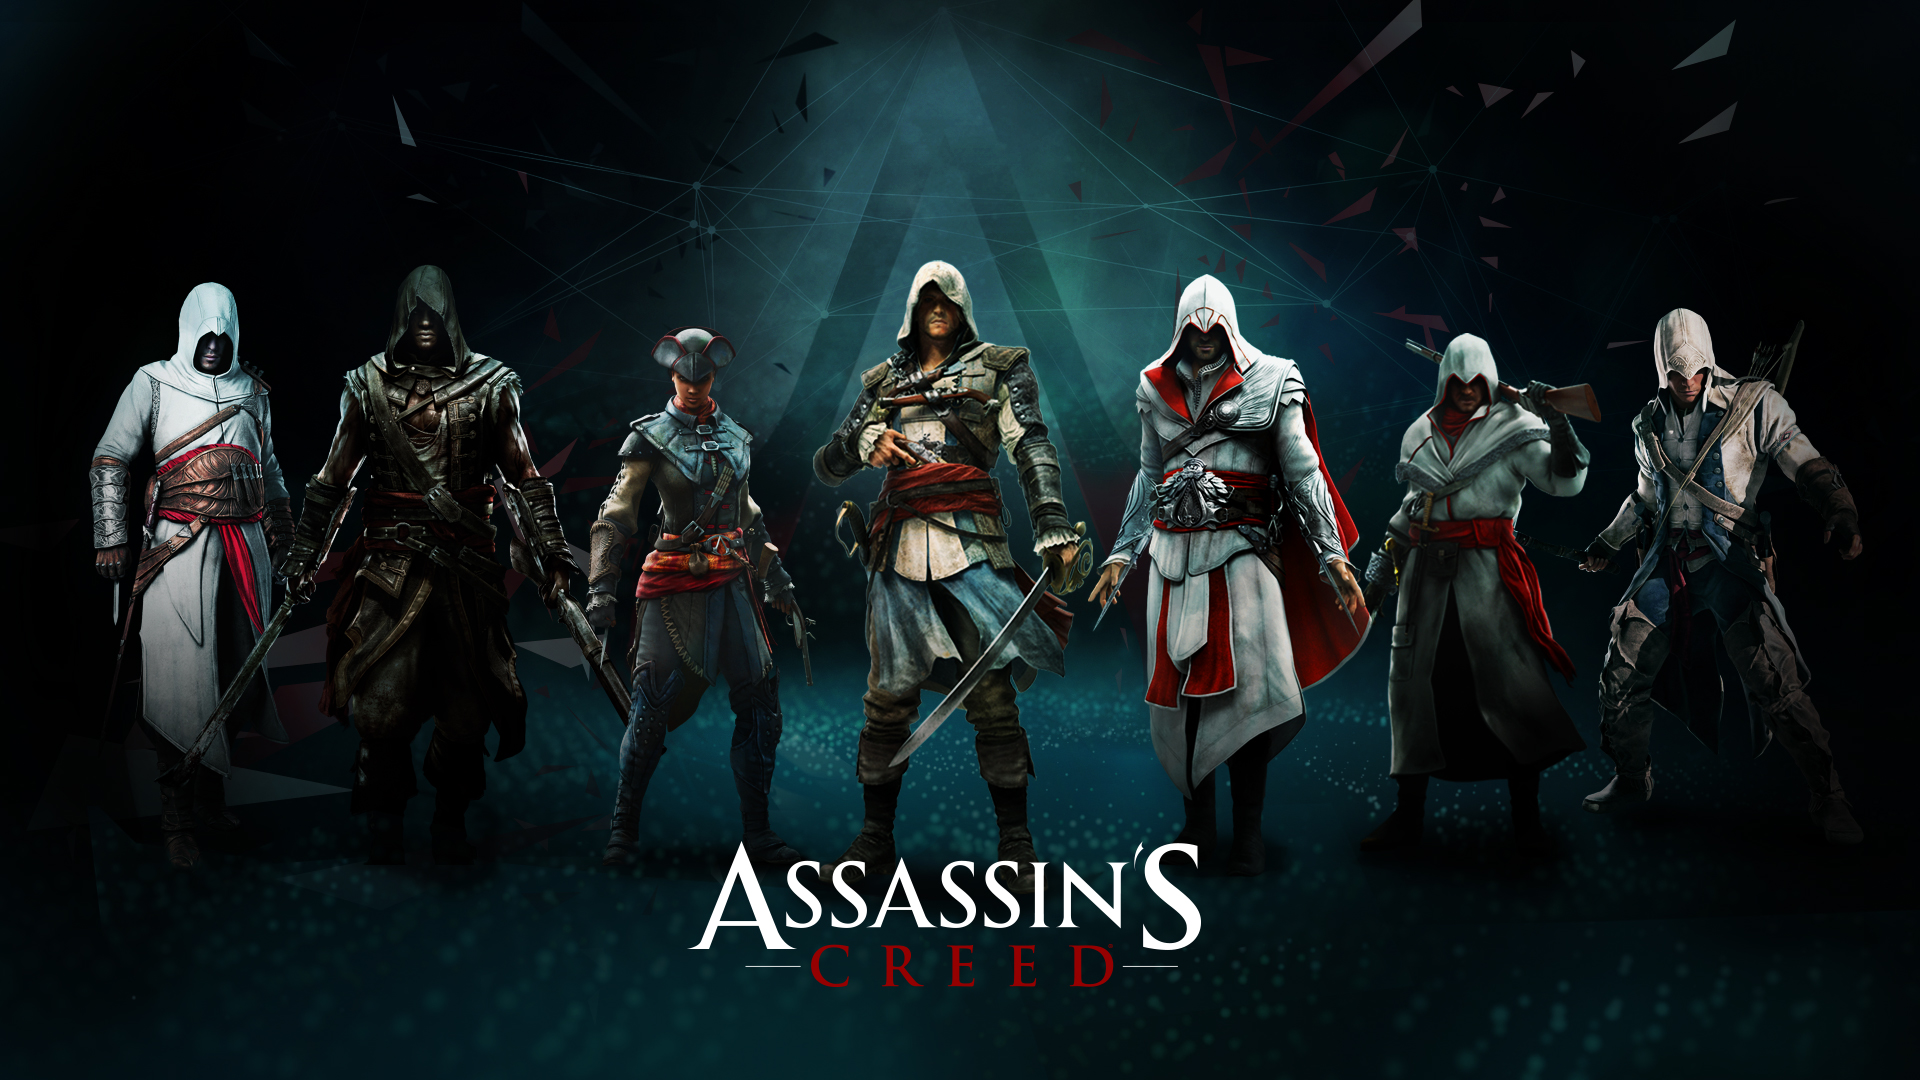 connor (assassin's creed), assassin's creed, video game, altair (assassin's creed), edward kenway, ezio (assassin's creed) Free Background